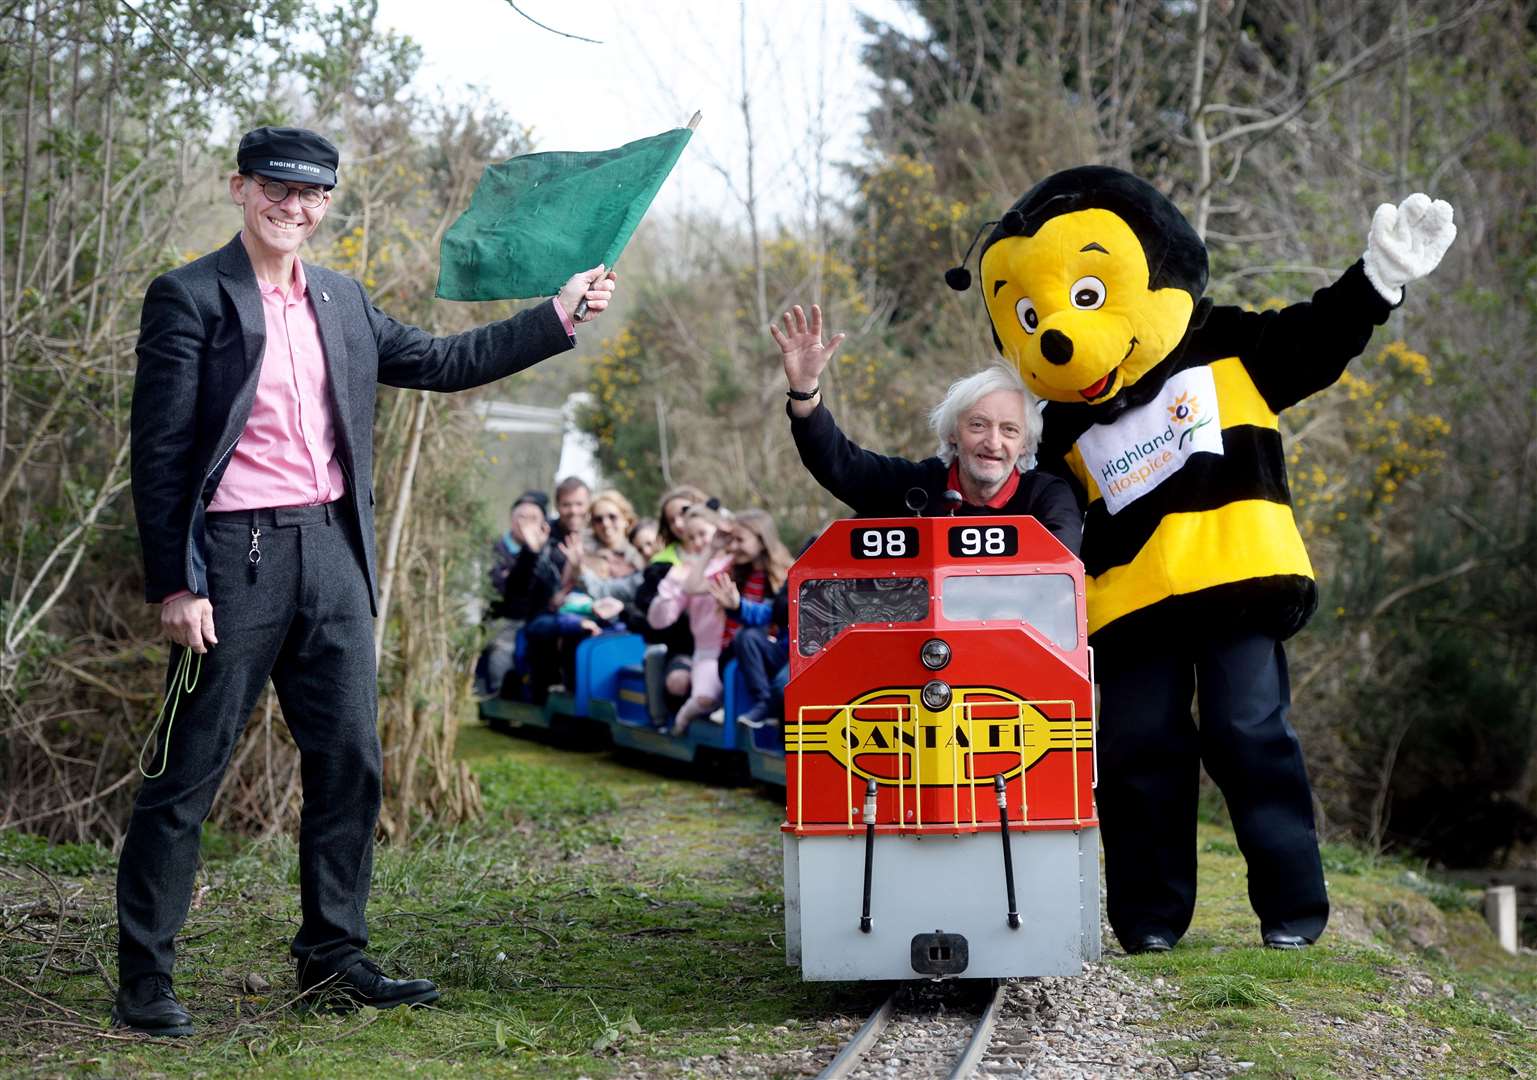 The miniature railway helps generate money for Highland Hospice.